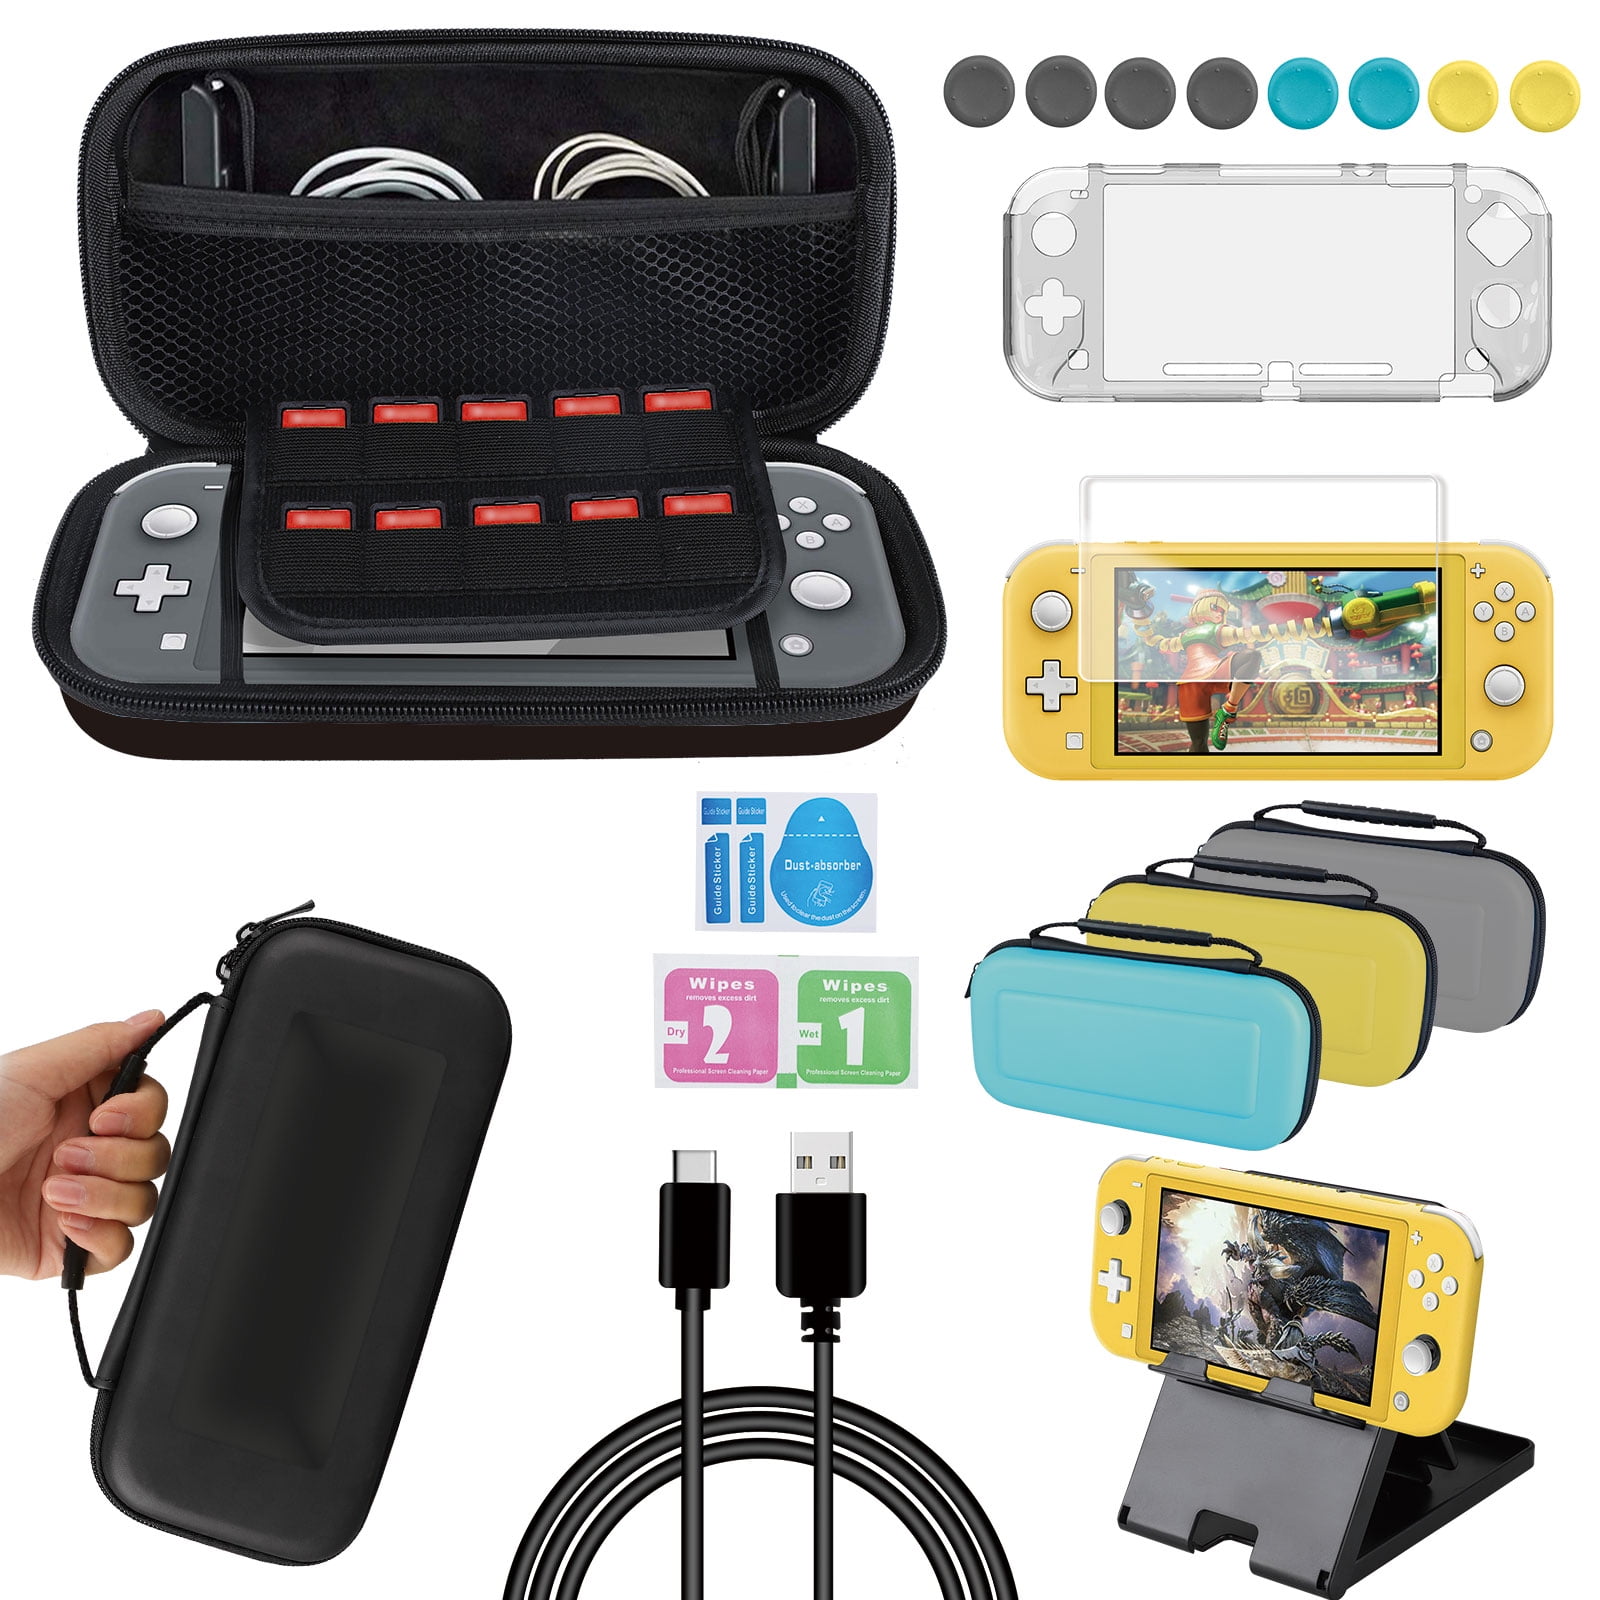 Accessories Kit for Nintendo Switch Lite, EEEkit Accessories Bundle with Carrying Case, Protective Cover Case, Tempered Glass Screen Protector, Adjustable Play Stand, Thumb Grips, Type-c Cable